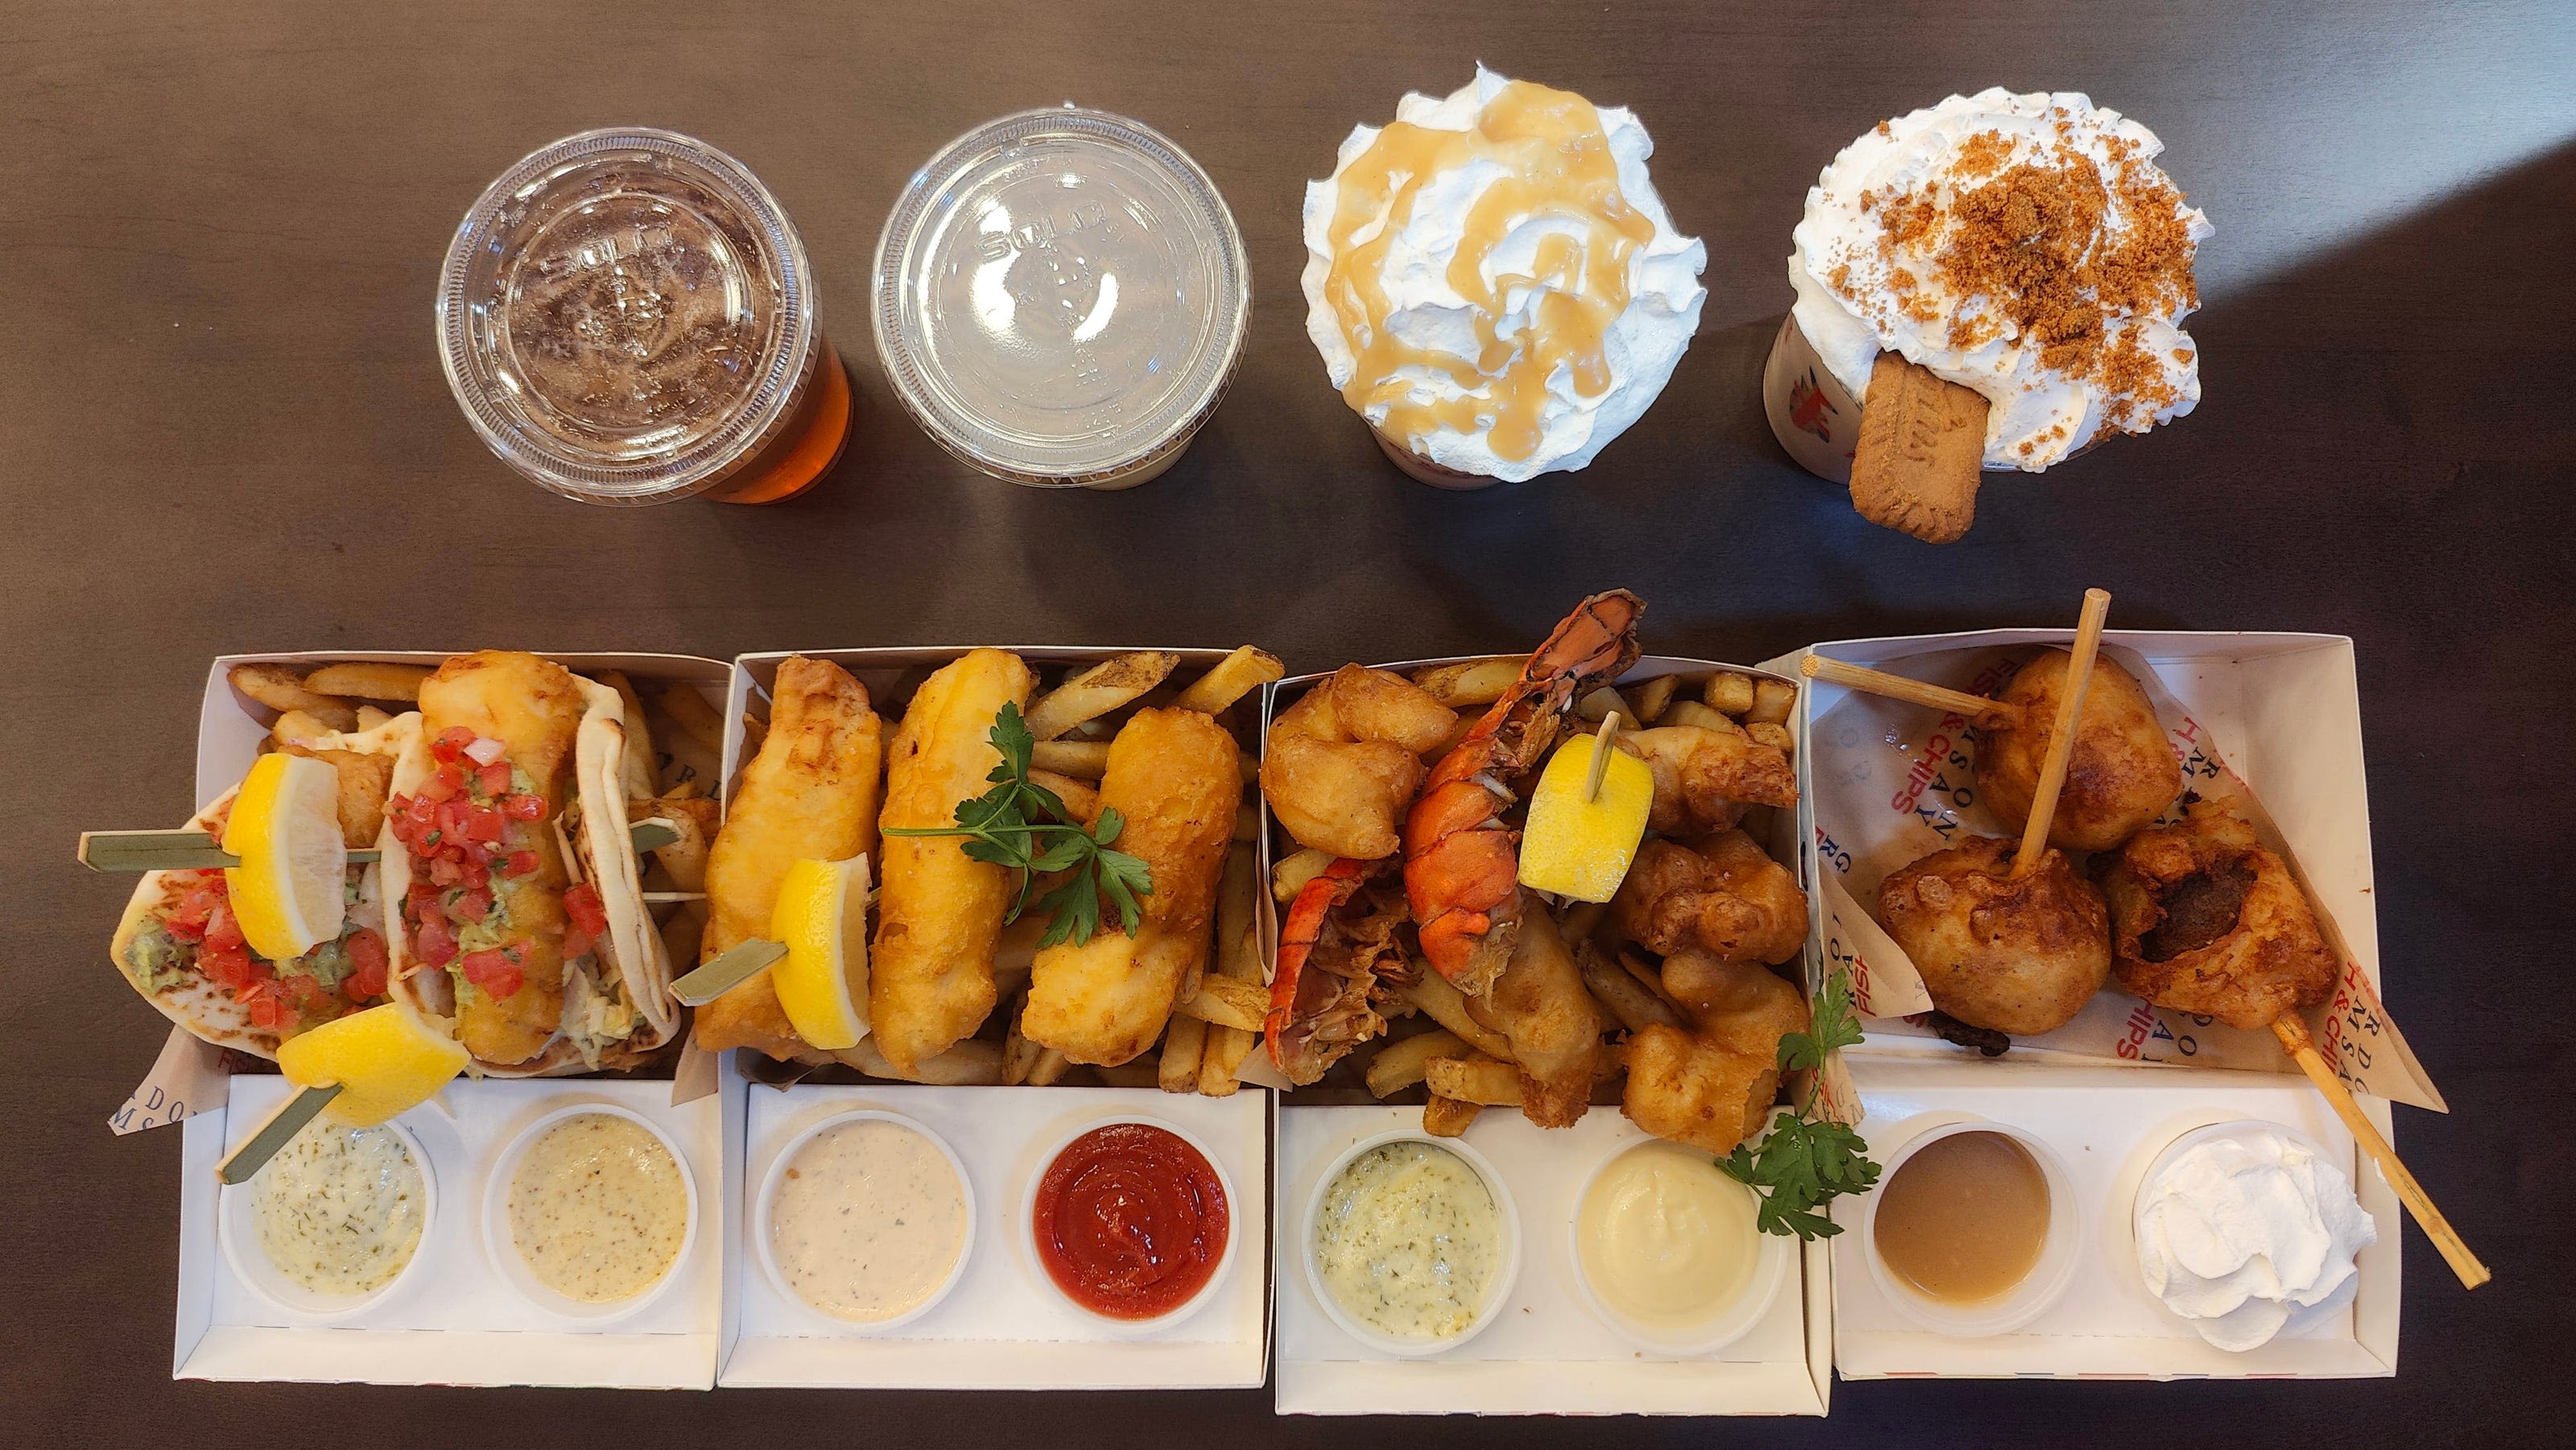 We tried (almost) everything on the menu at Gordon Ramsay Fish & Chips. Was it worth it?